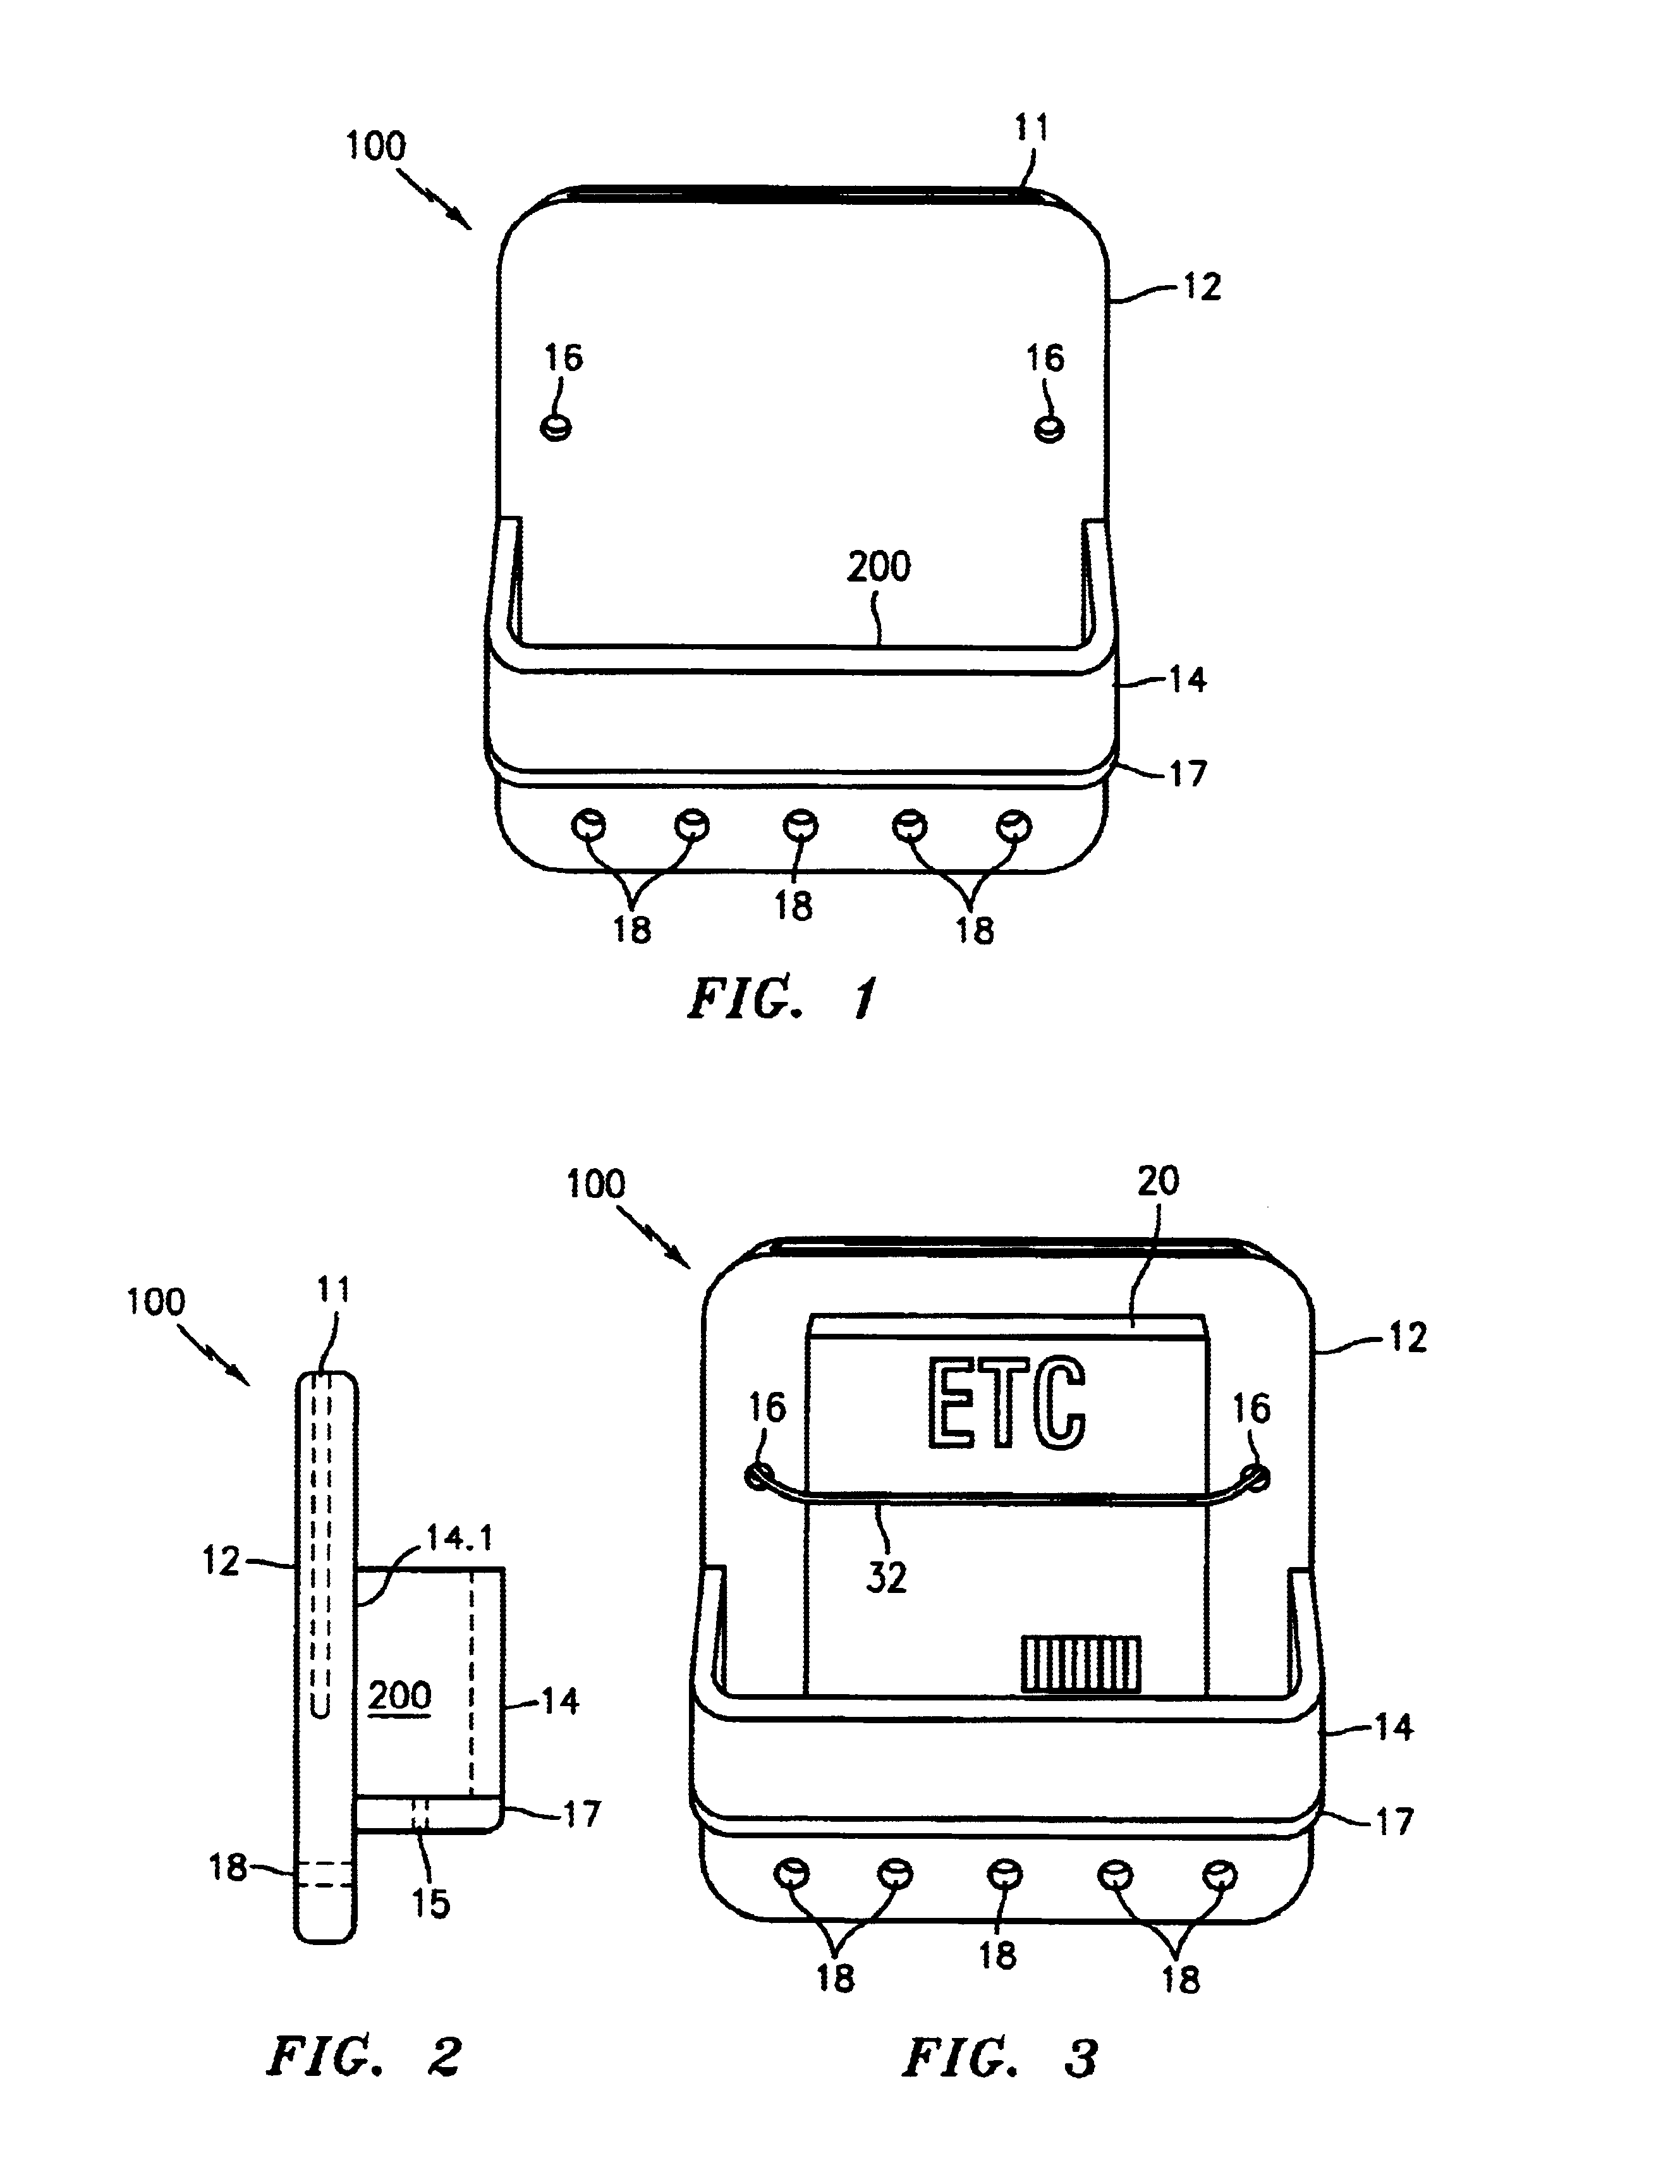 Electronic toll collection tag holder for a motorcycle